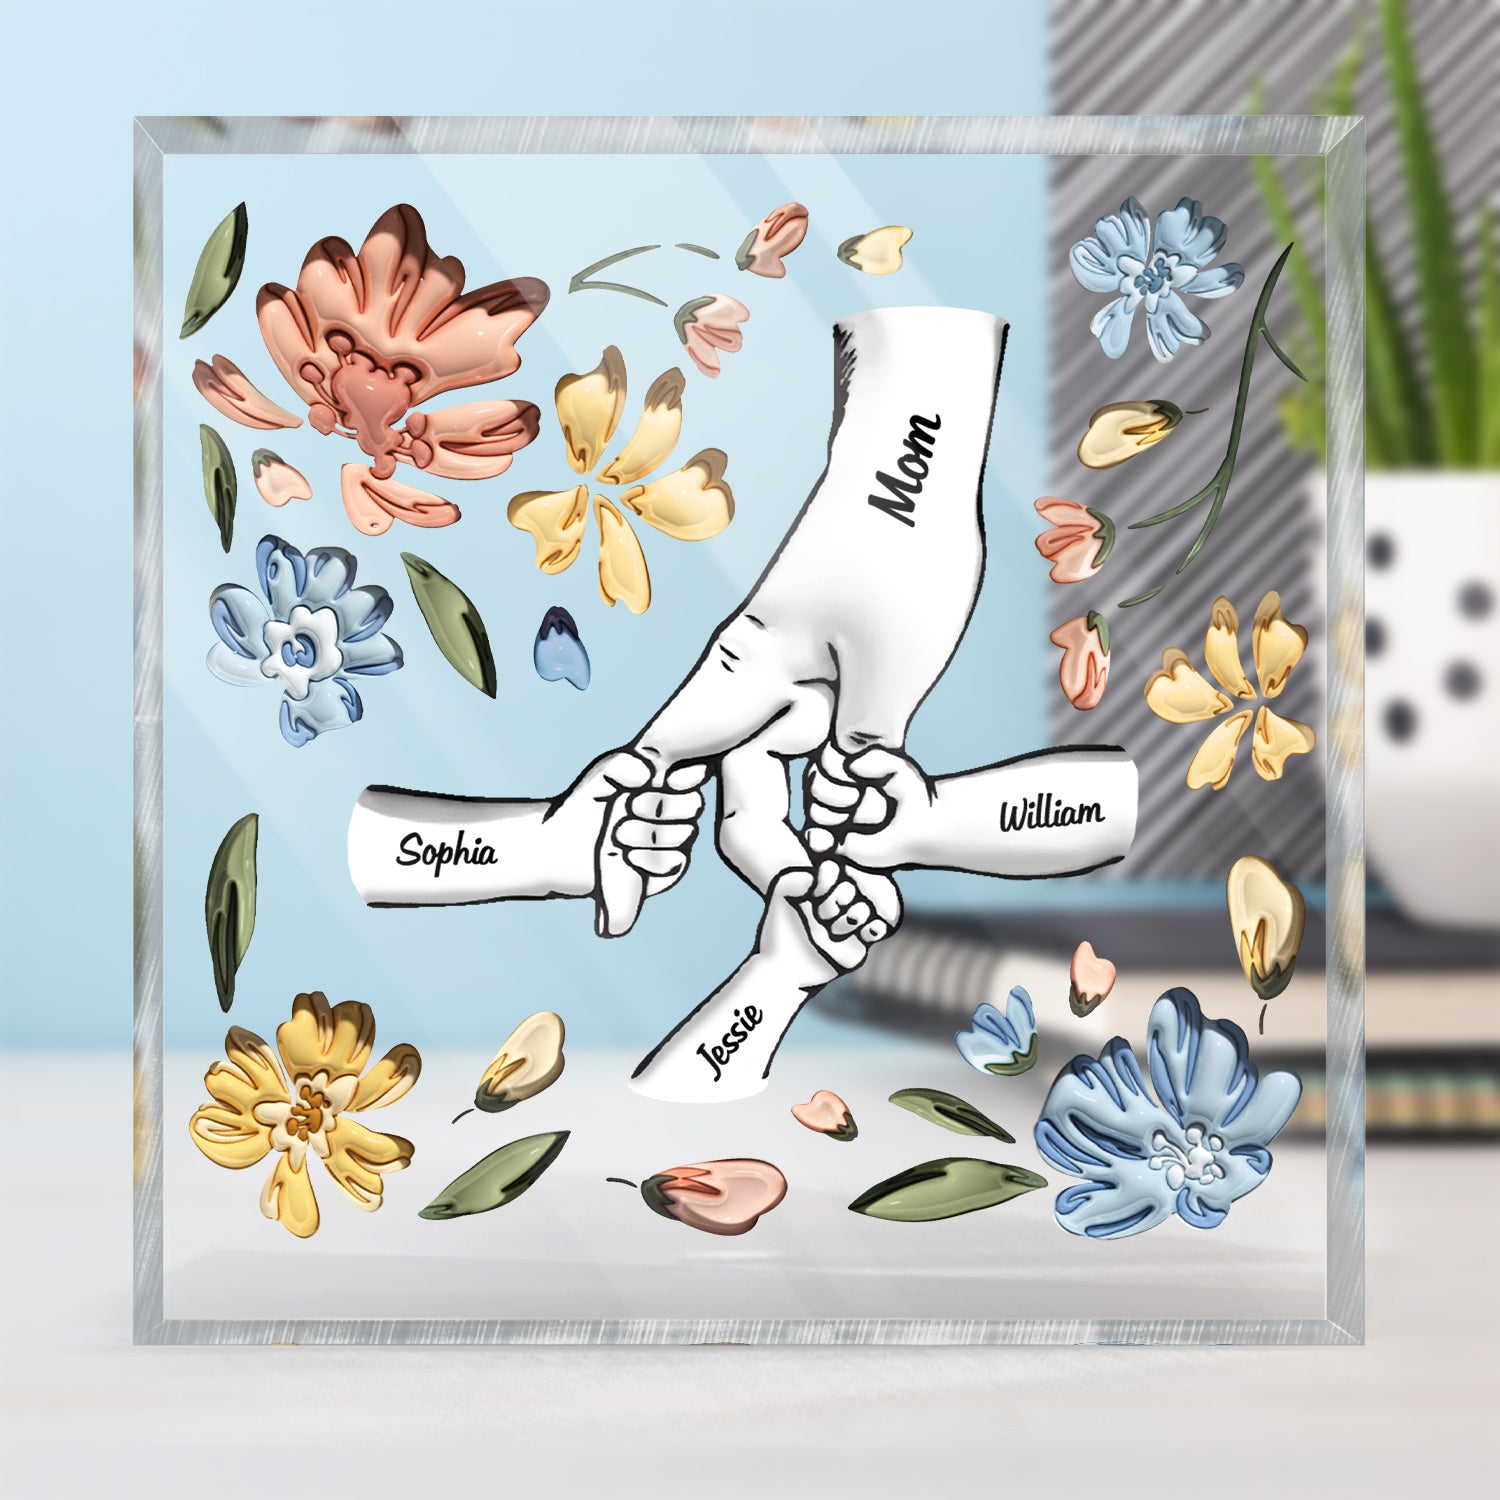 Hand In Hand, I Will Always Protect You - Gift For Mom, Grandma - Personalized Square Shaped Acrylic Plaque